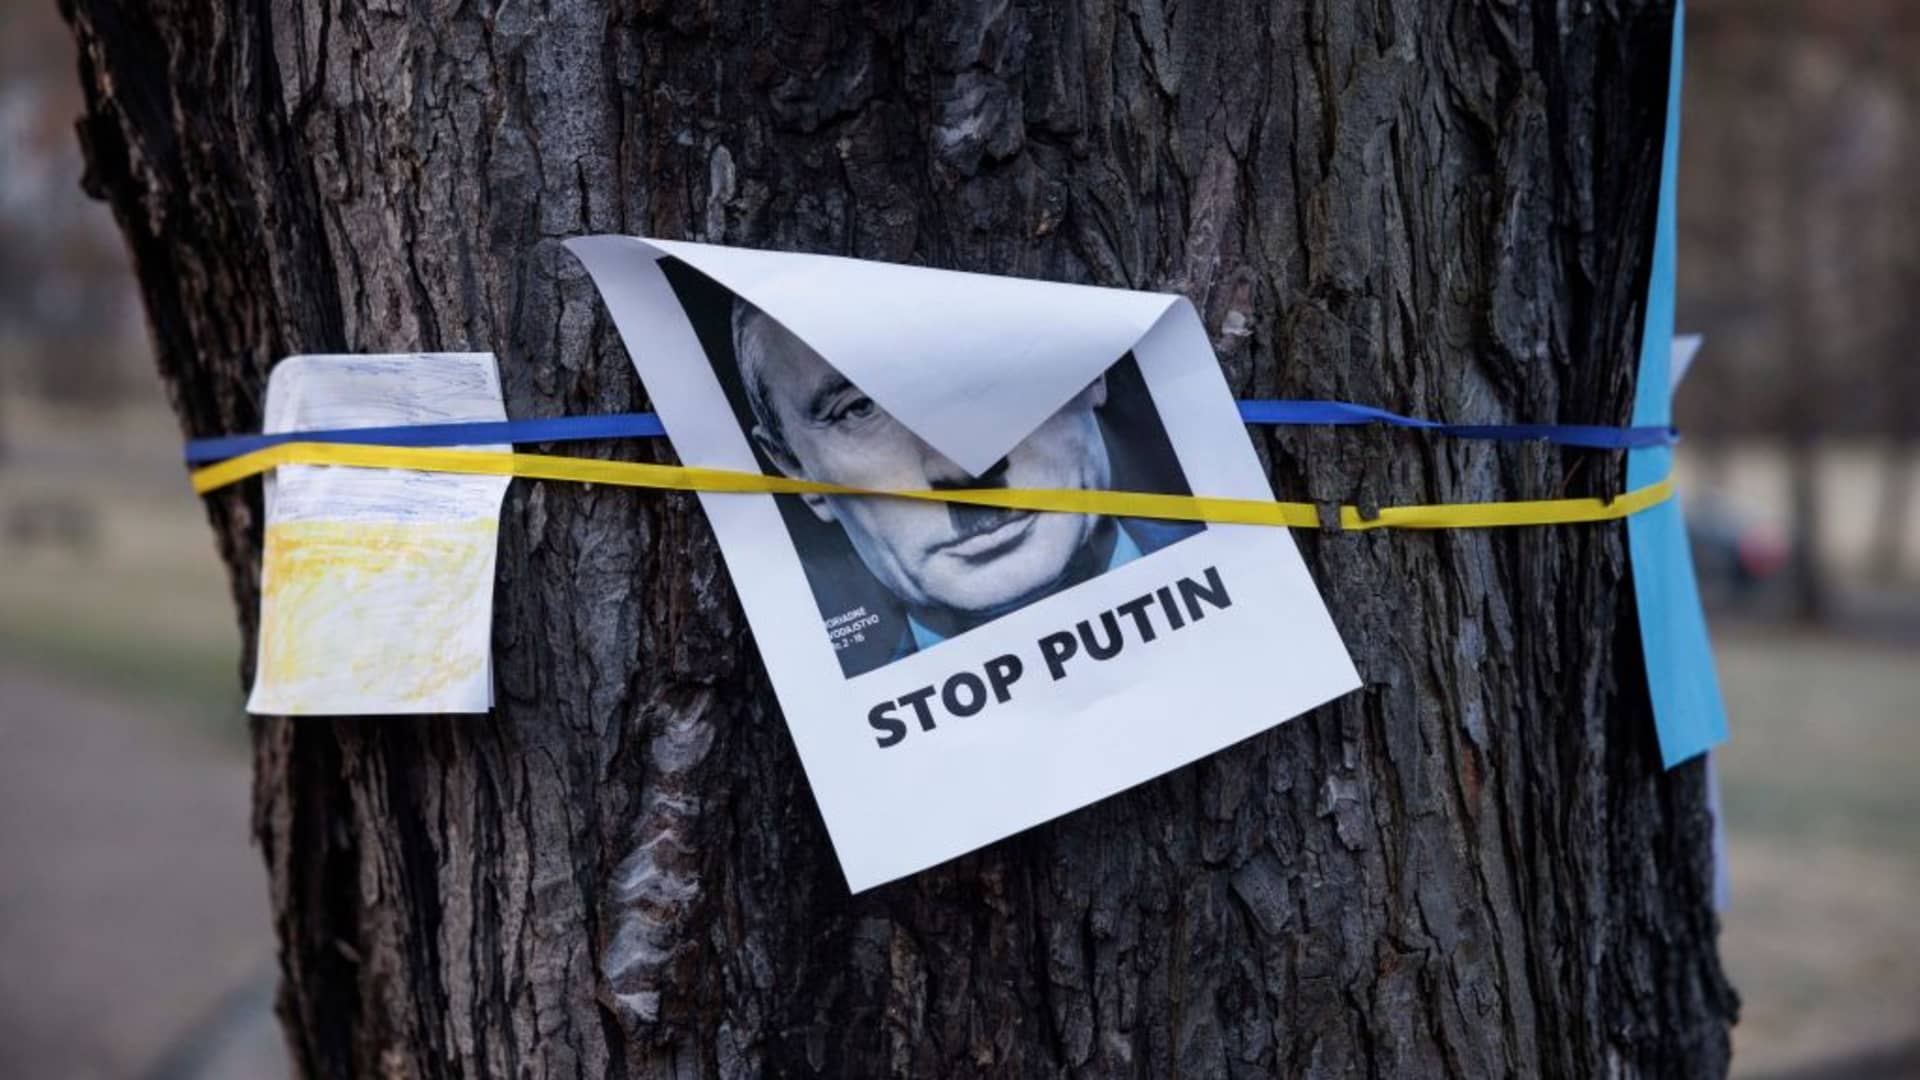 Messages of support for Ukraine outside the Russian Embassy in Prague, Czech Republic, on Monday, Feb. 28, 2022. The Czech Republic reopened its embassy in Ukraine's capital, Kyiv, nearly 2 months after its closure on 24 February following Russia's invasion of the country.